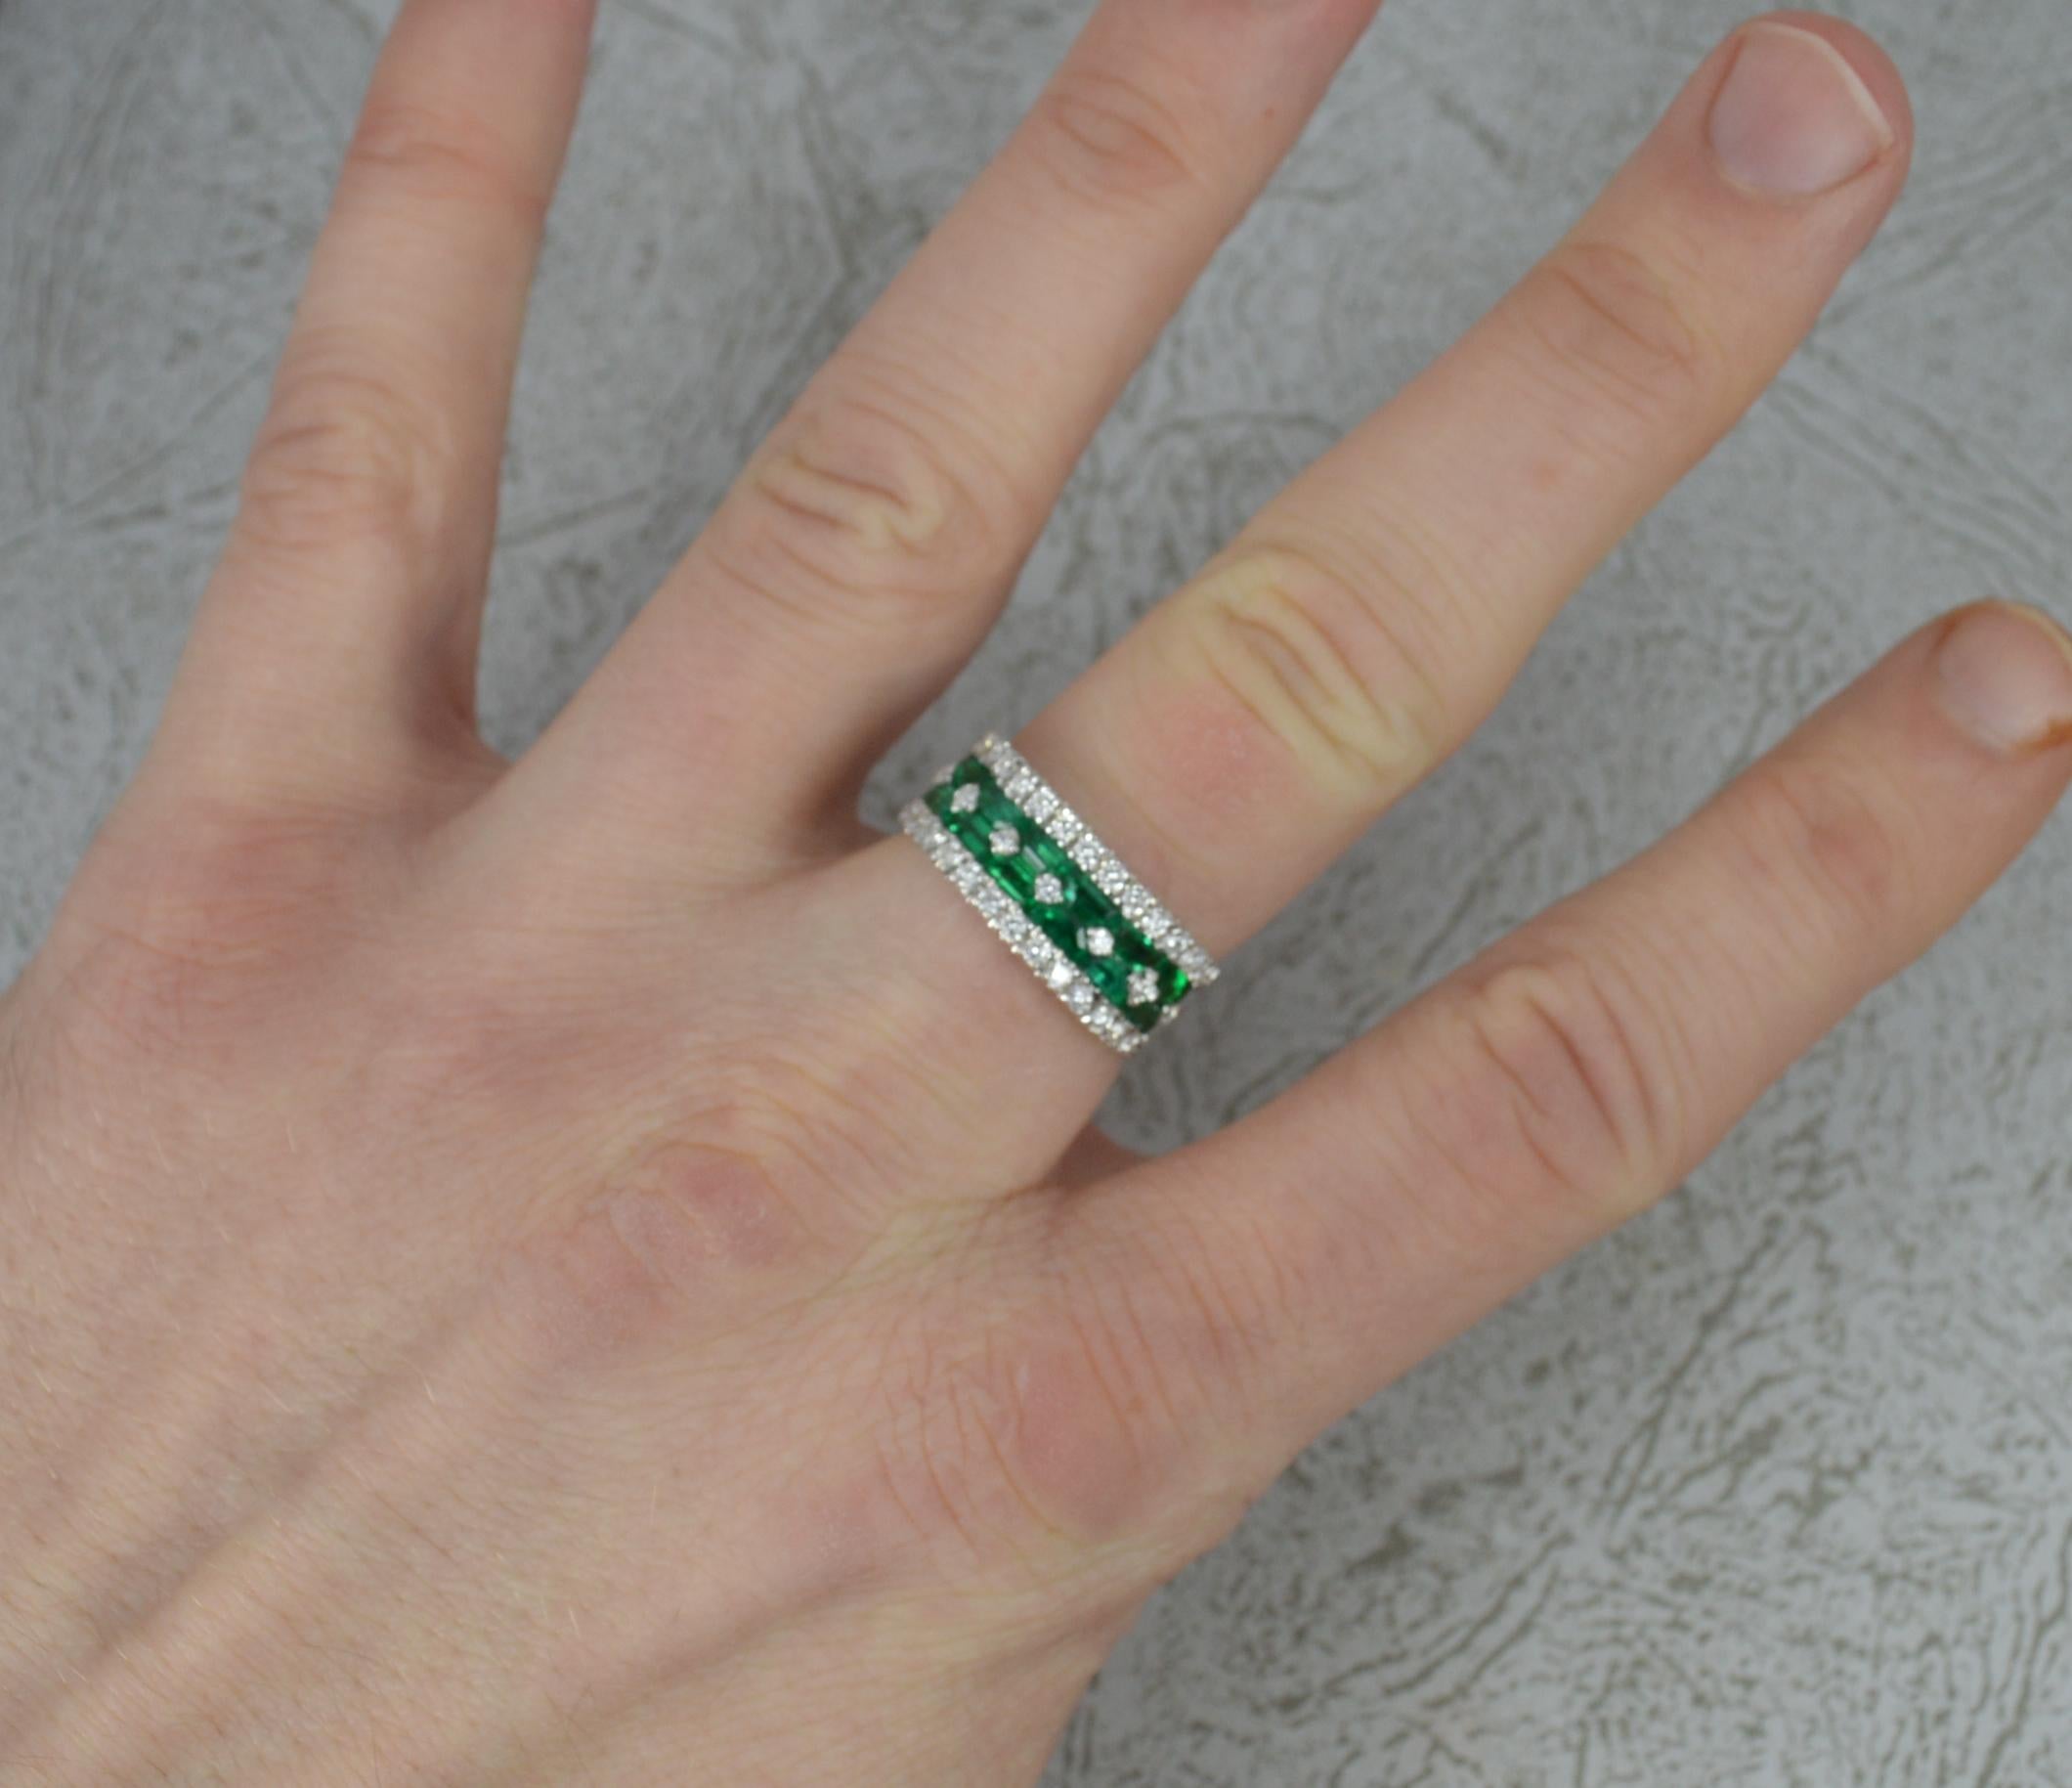 A stunning quality 18ct Gold, Emerald and Diamond cluster ring.
A heavy and substantial 18 carat white gold example.
Made and designed by Di Go, a fine Italian jewellers.
Four row design with round brilliant cut natural diamonds and emerald cut